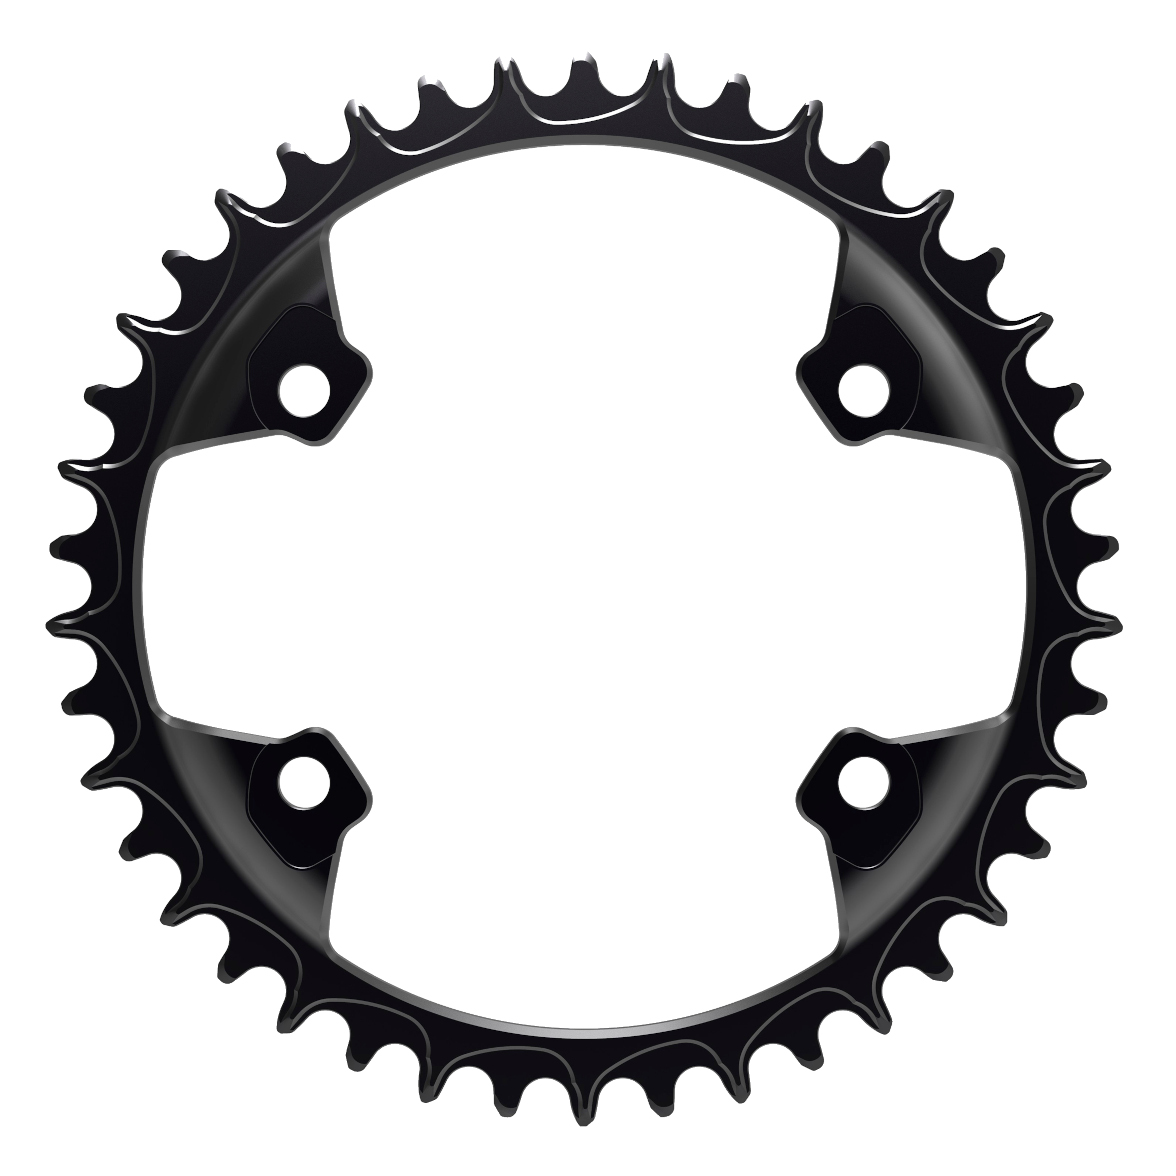 Productfoto van Alugear Narrow Wide Road Chainring - for Shimano GRX Gravel 110 BCD Asymmetric - 4-Bolt